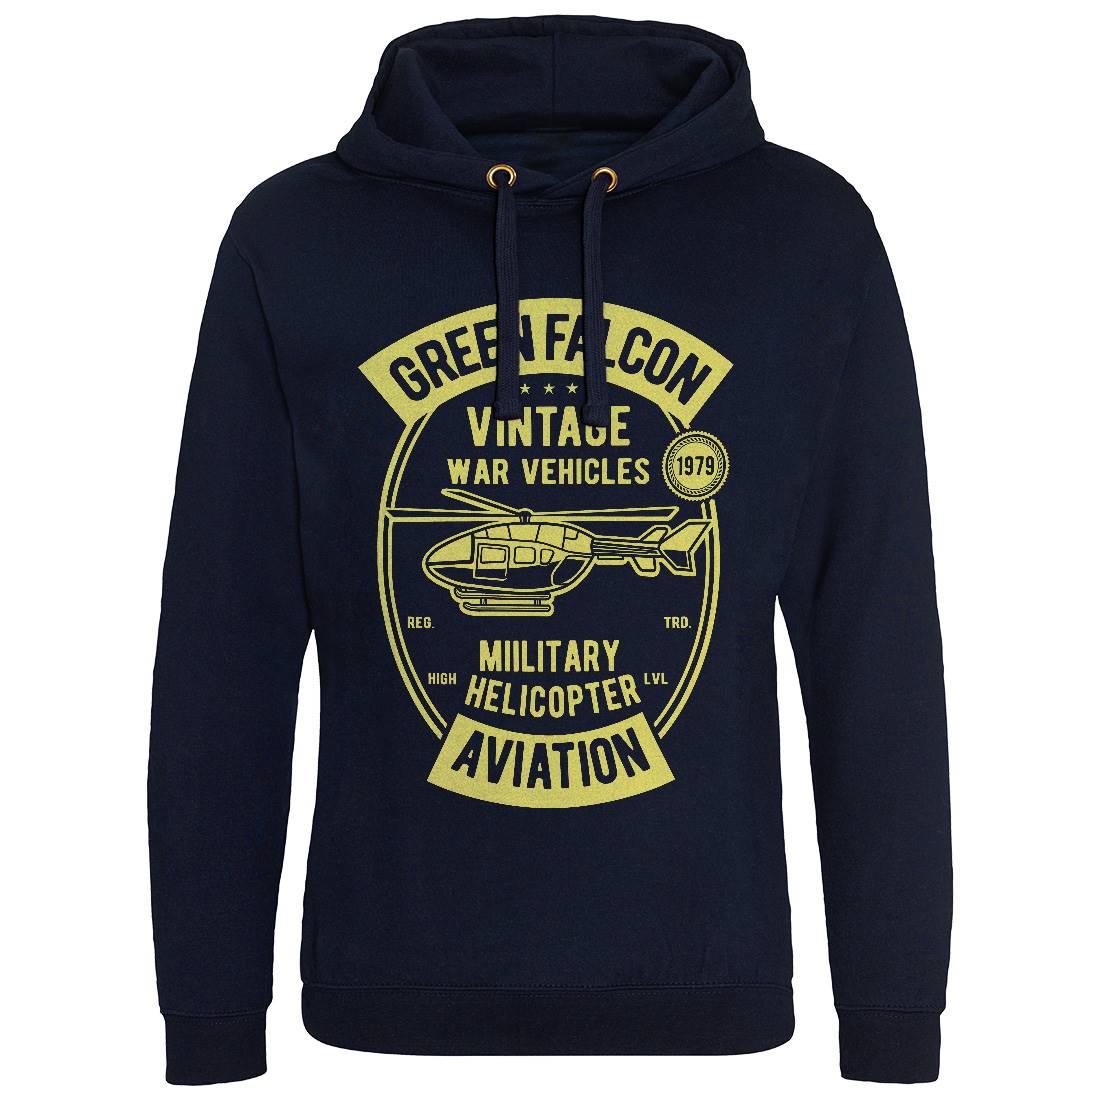 Green Falcon Mens Hoodie Without Pocket Vehicles D540